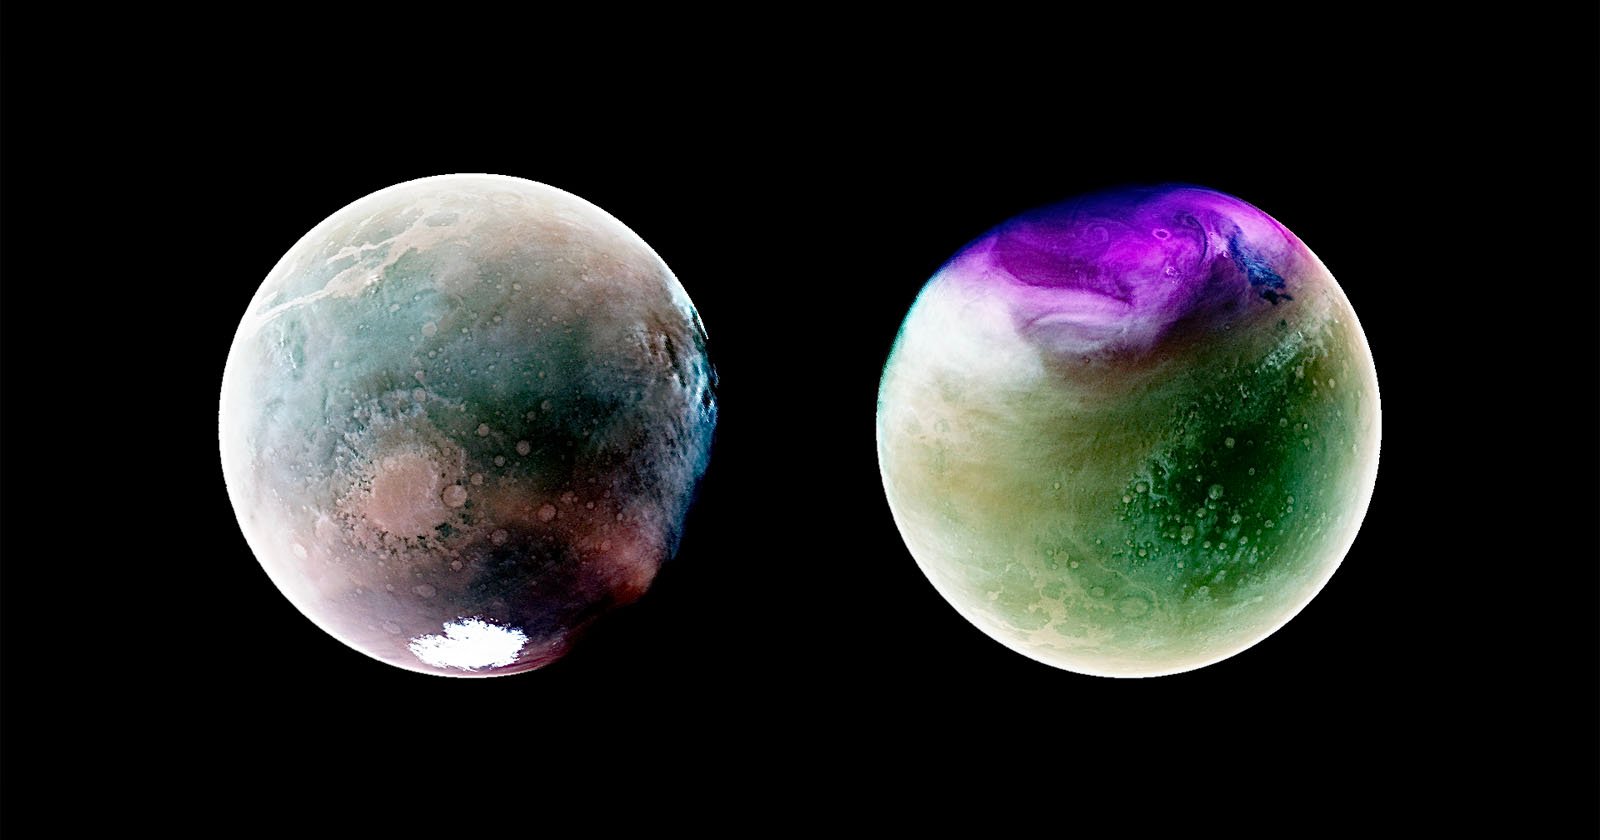 Infrared Photos Show the Difference Between Winter and Summer on Mars